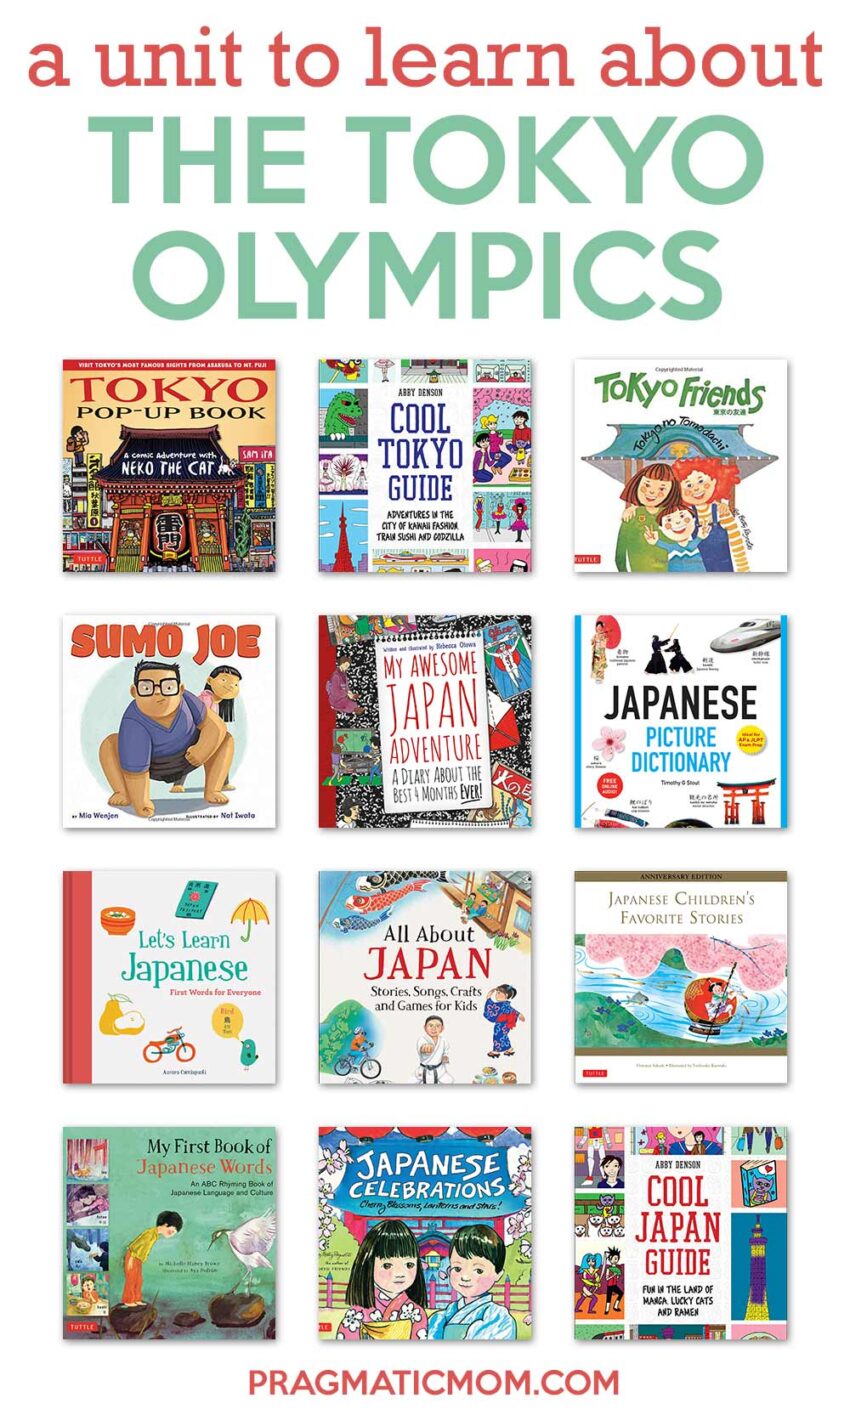 A Unit to Learn About the Tokyo Olympics